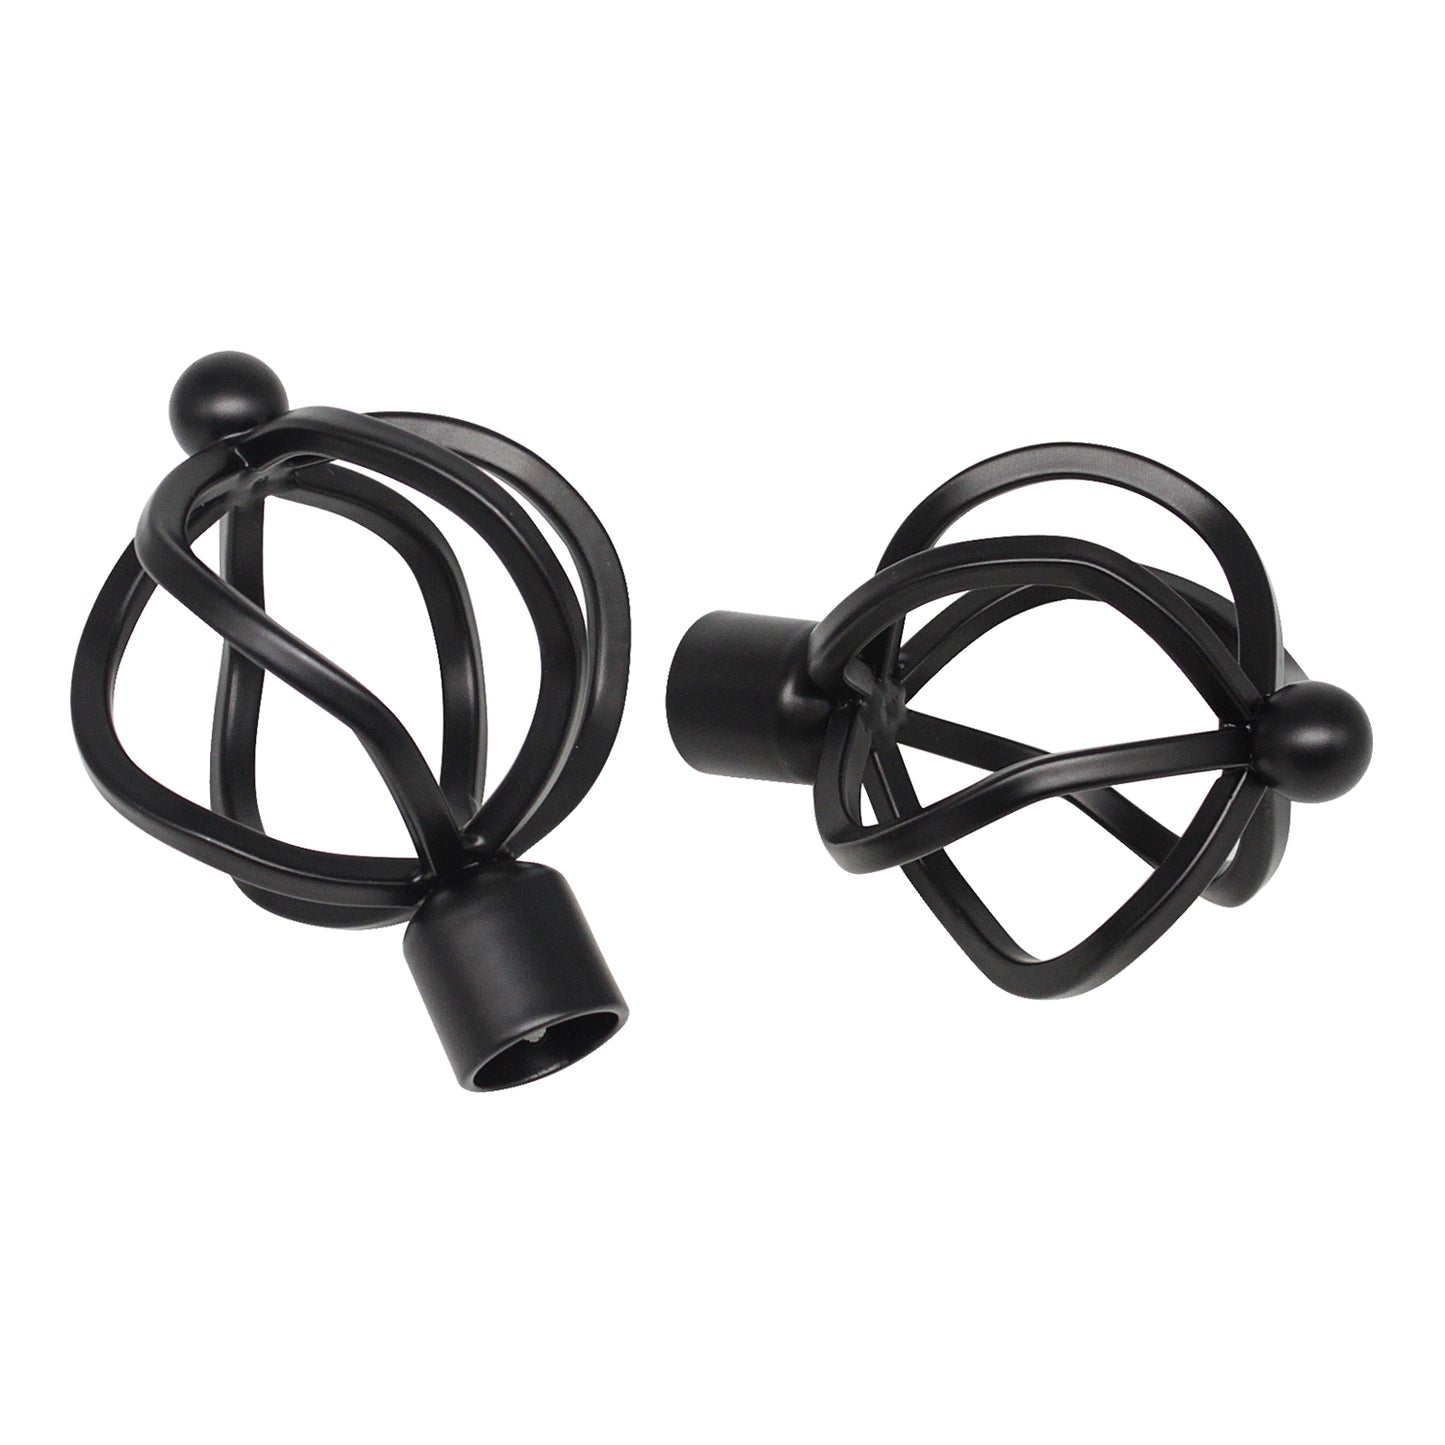 3/4" Inch Black Cafe Curtain Rods with Twisted Cage Finials